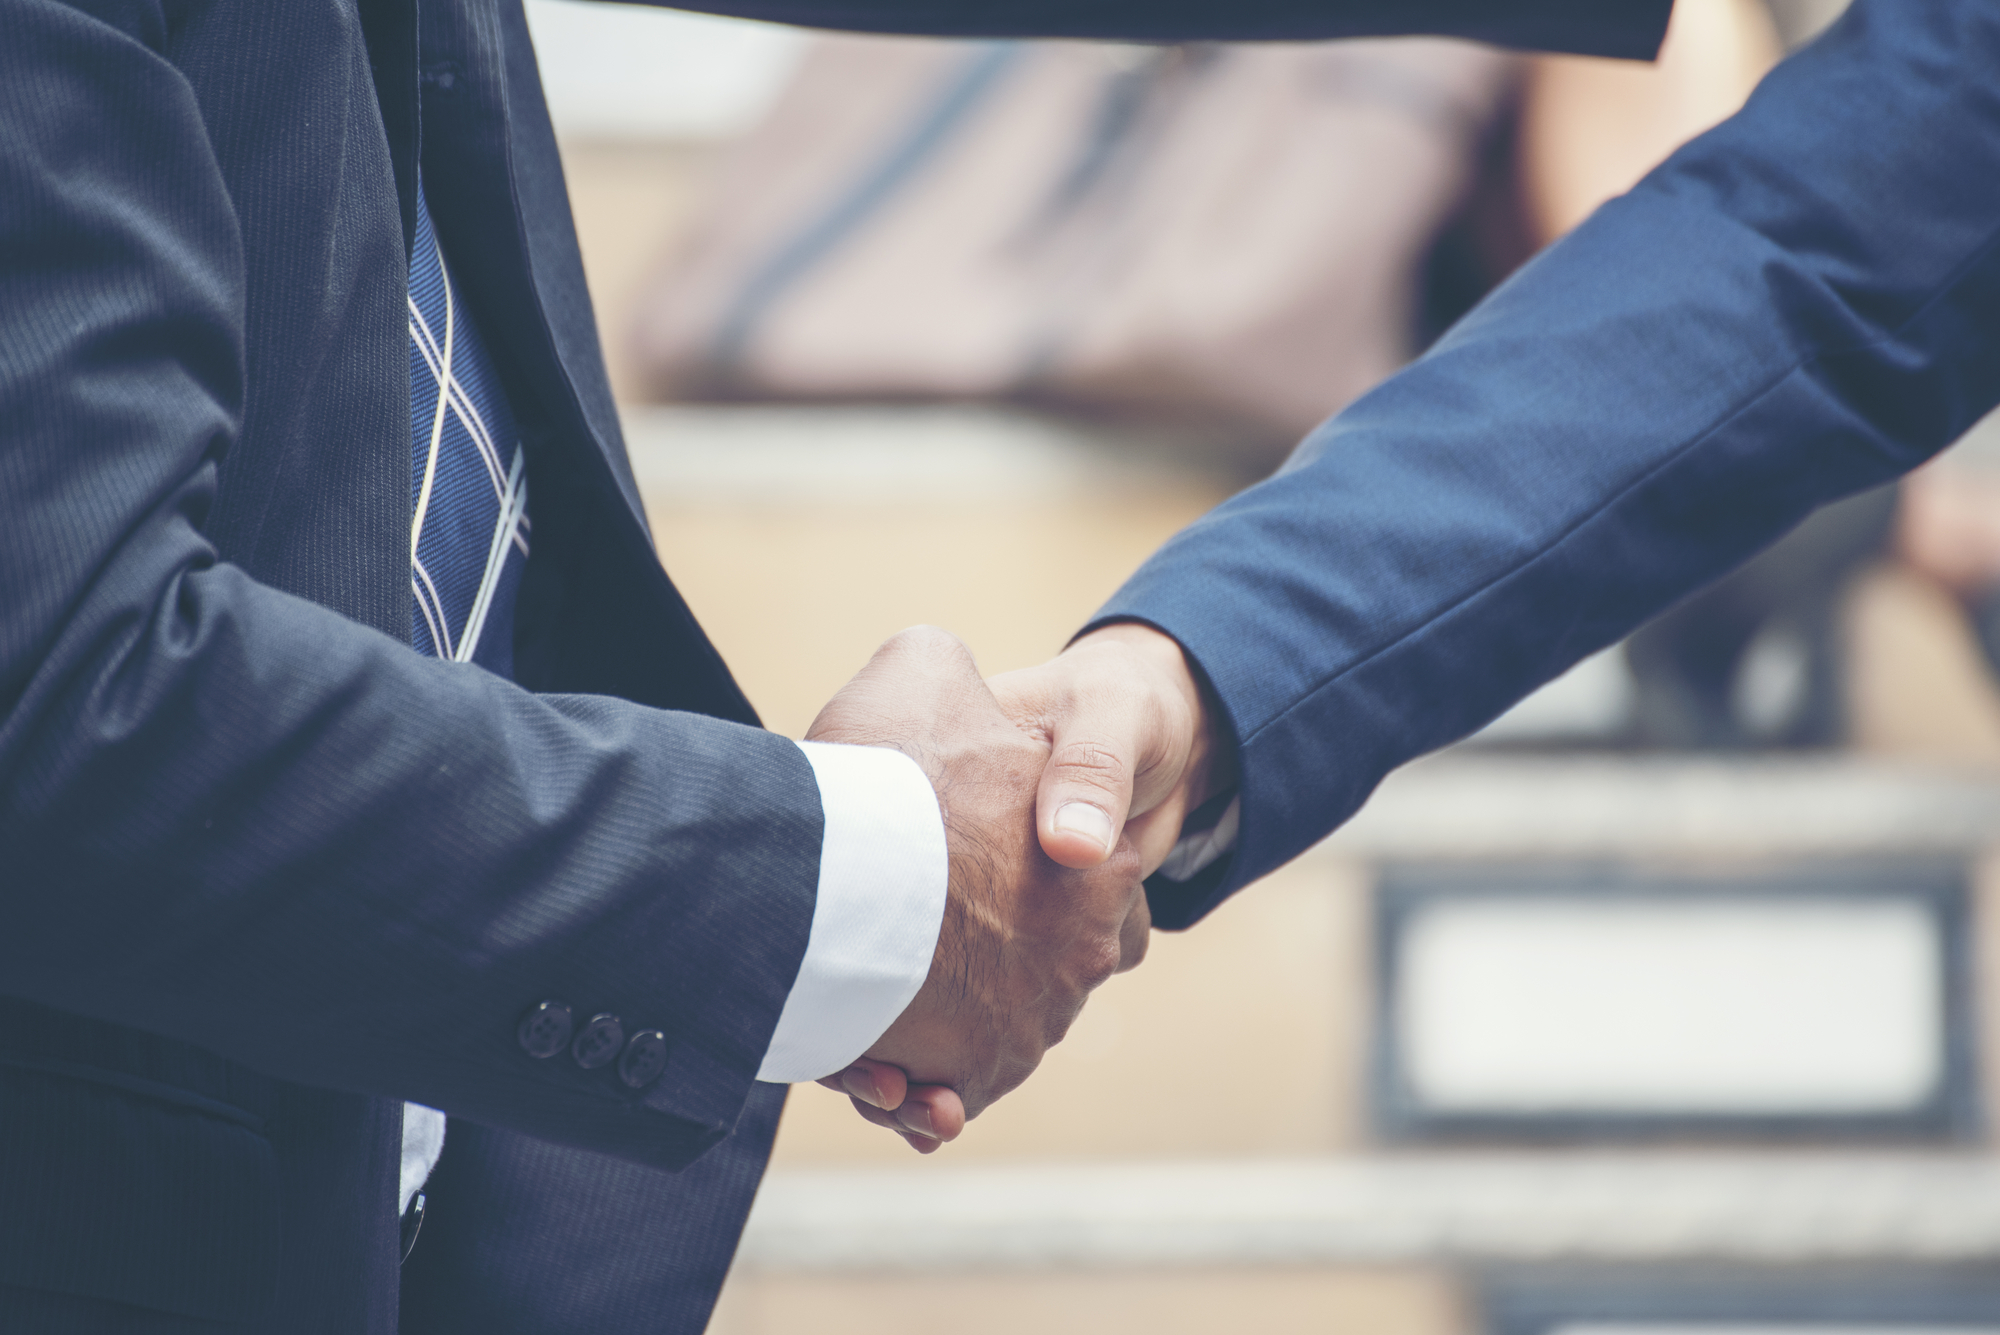 CLose up of business persons shaking hands